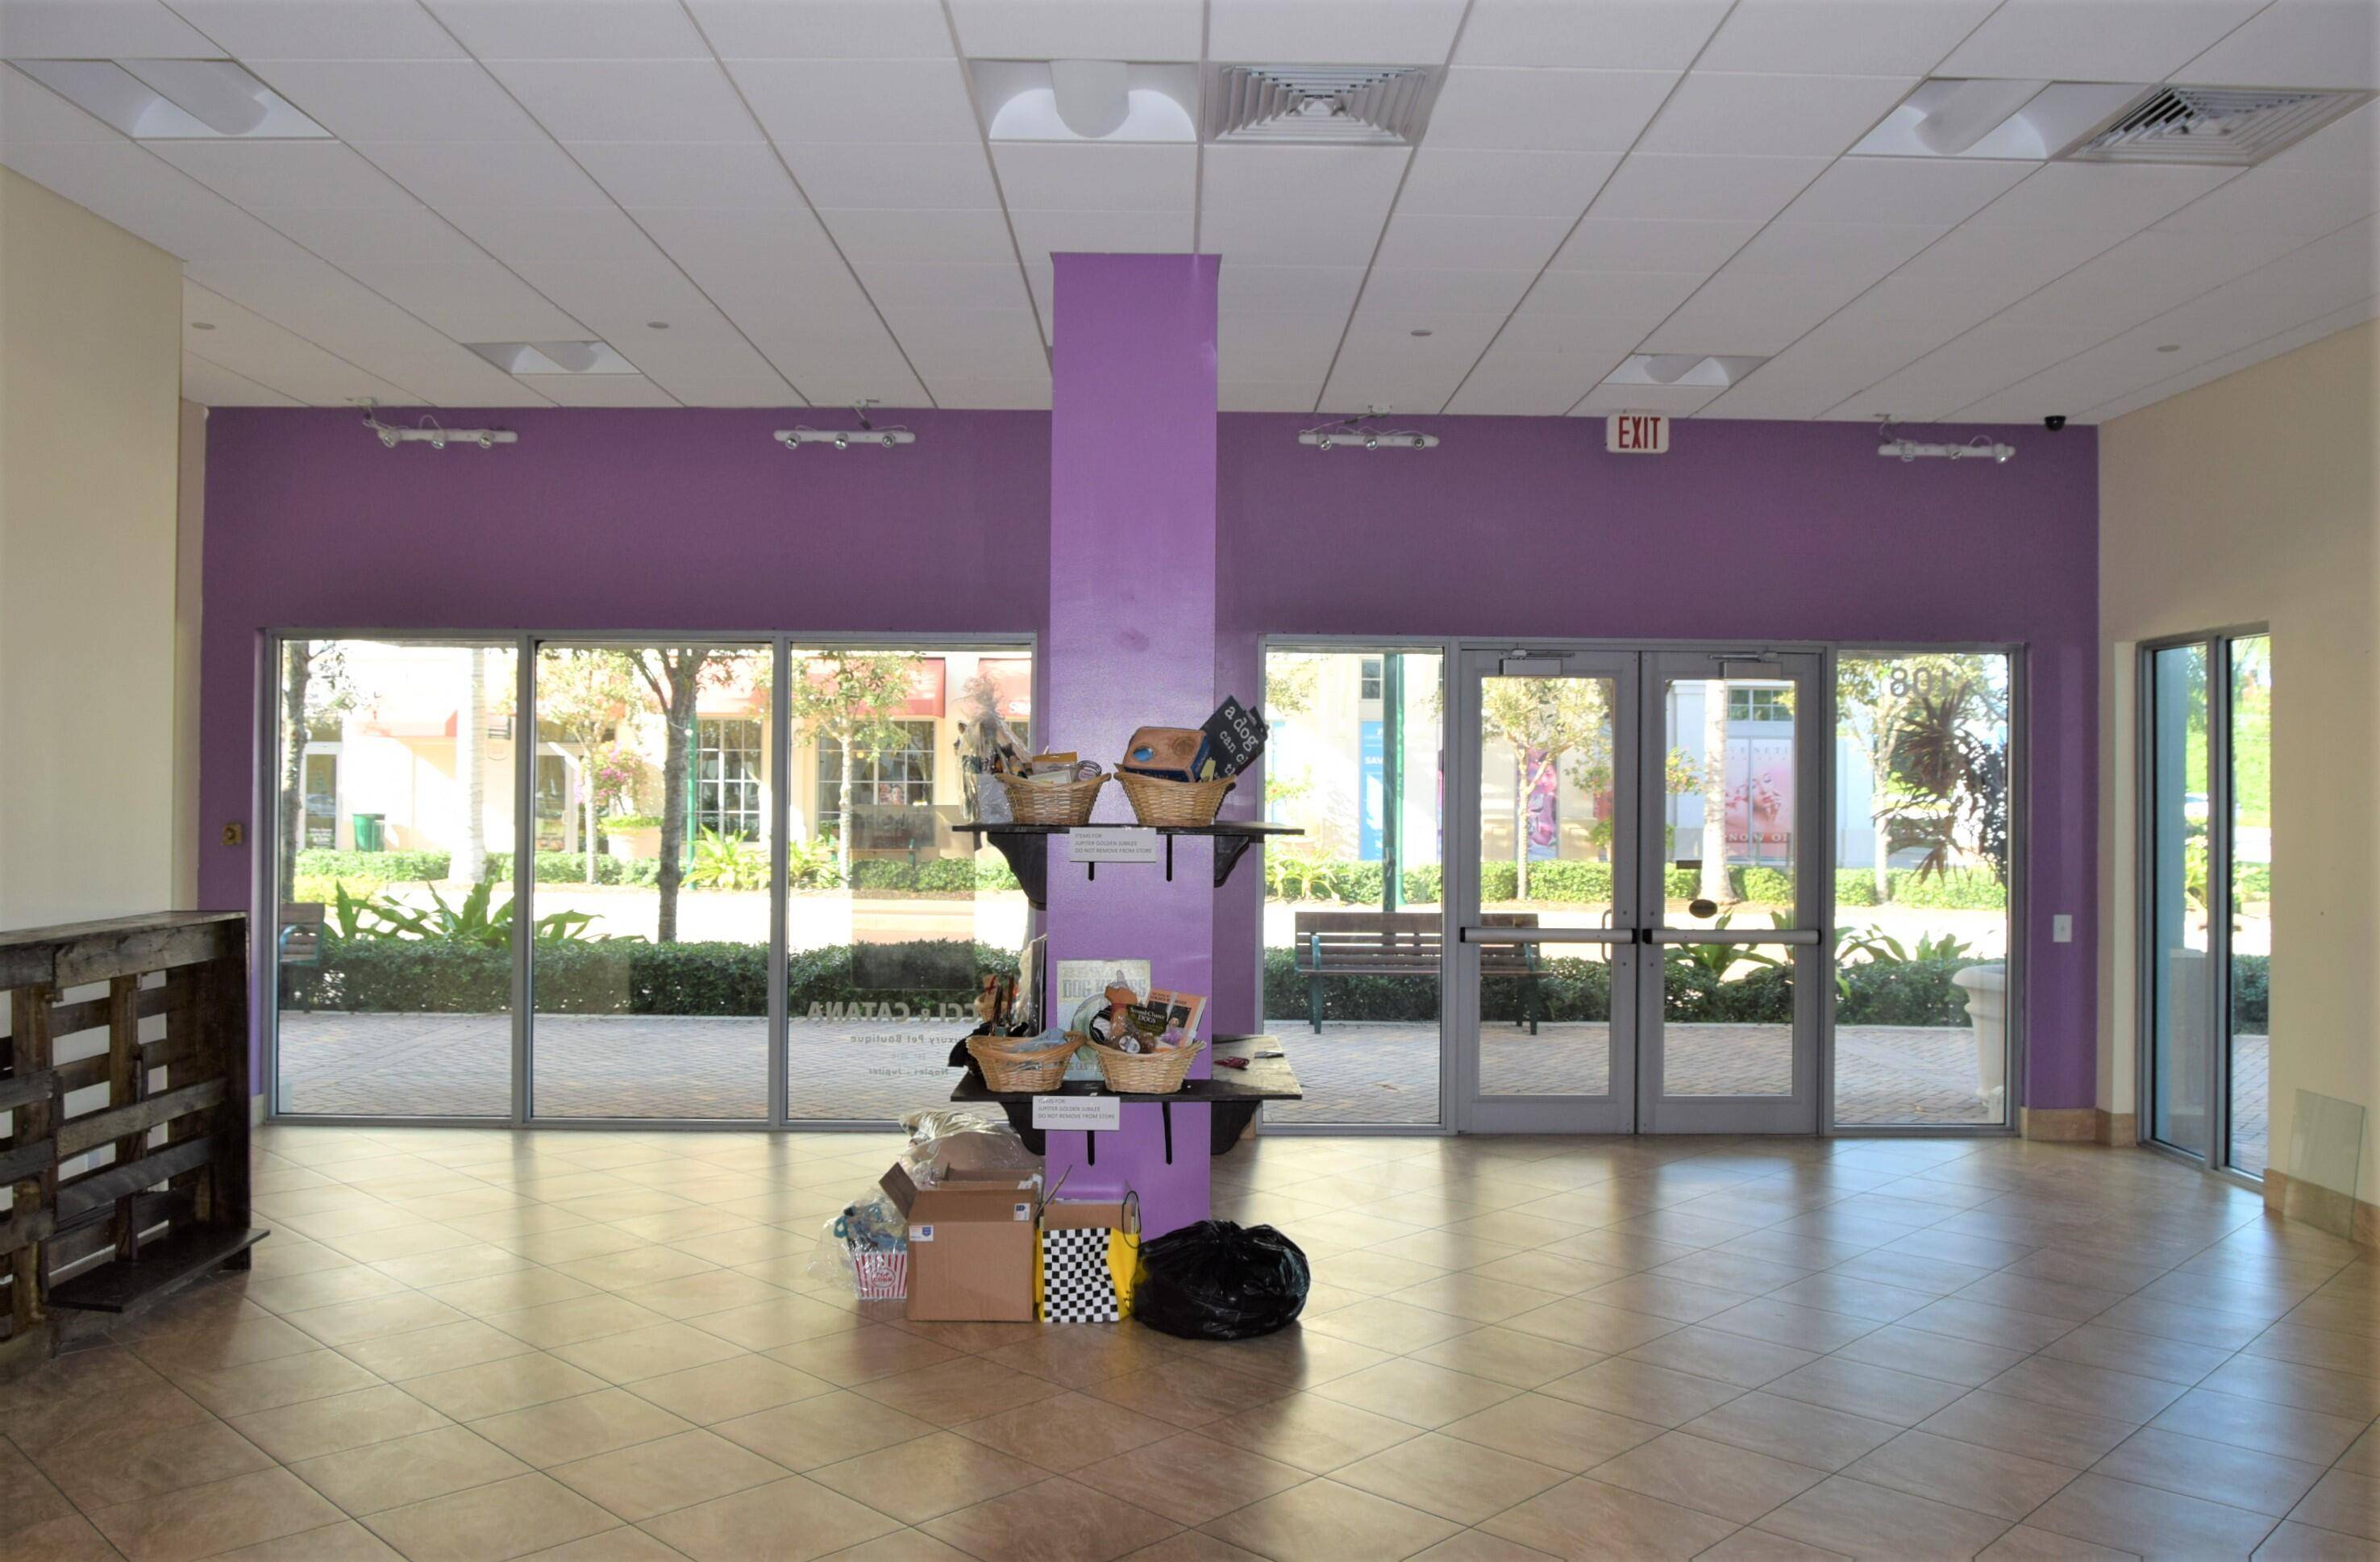 1, 897 SF retail office space situated at the entrance of Harbourside Place.